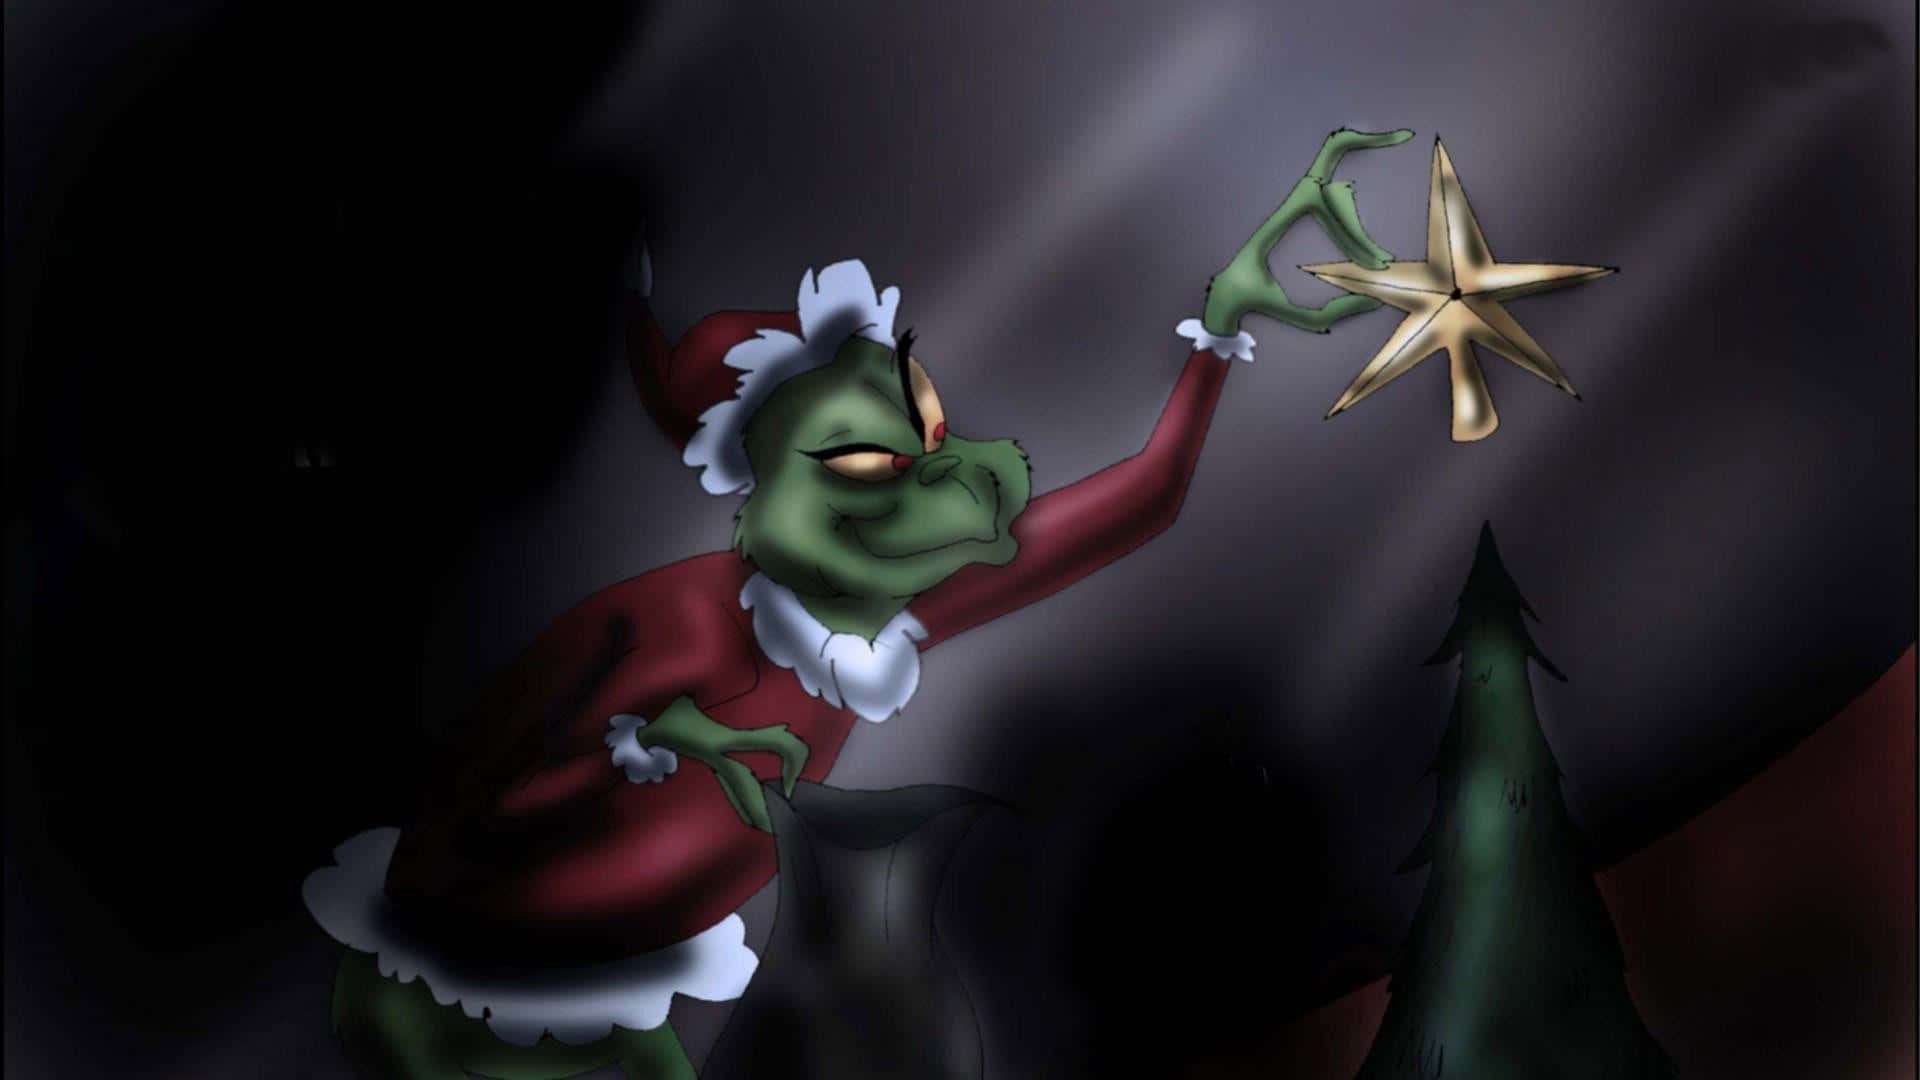 Celebrate Christmas With The Grinch! Background